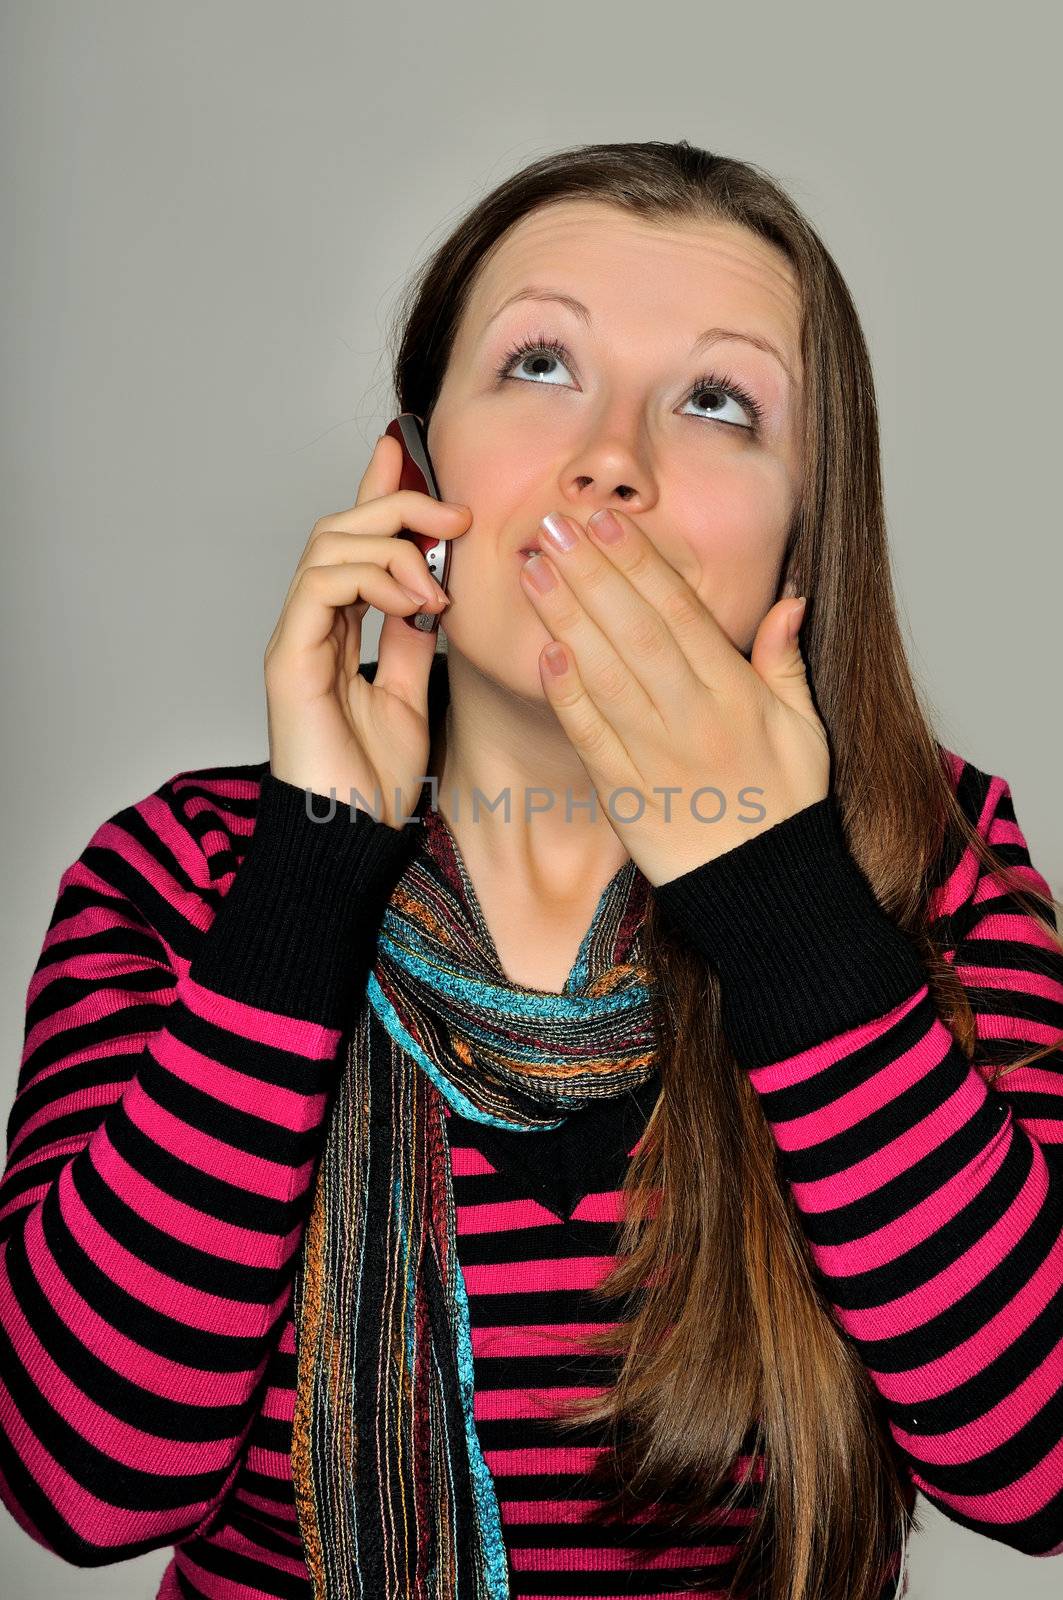 A young girl emotionally expressive talking on a mobile phone